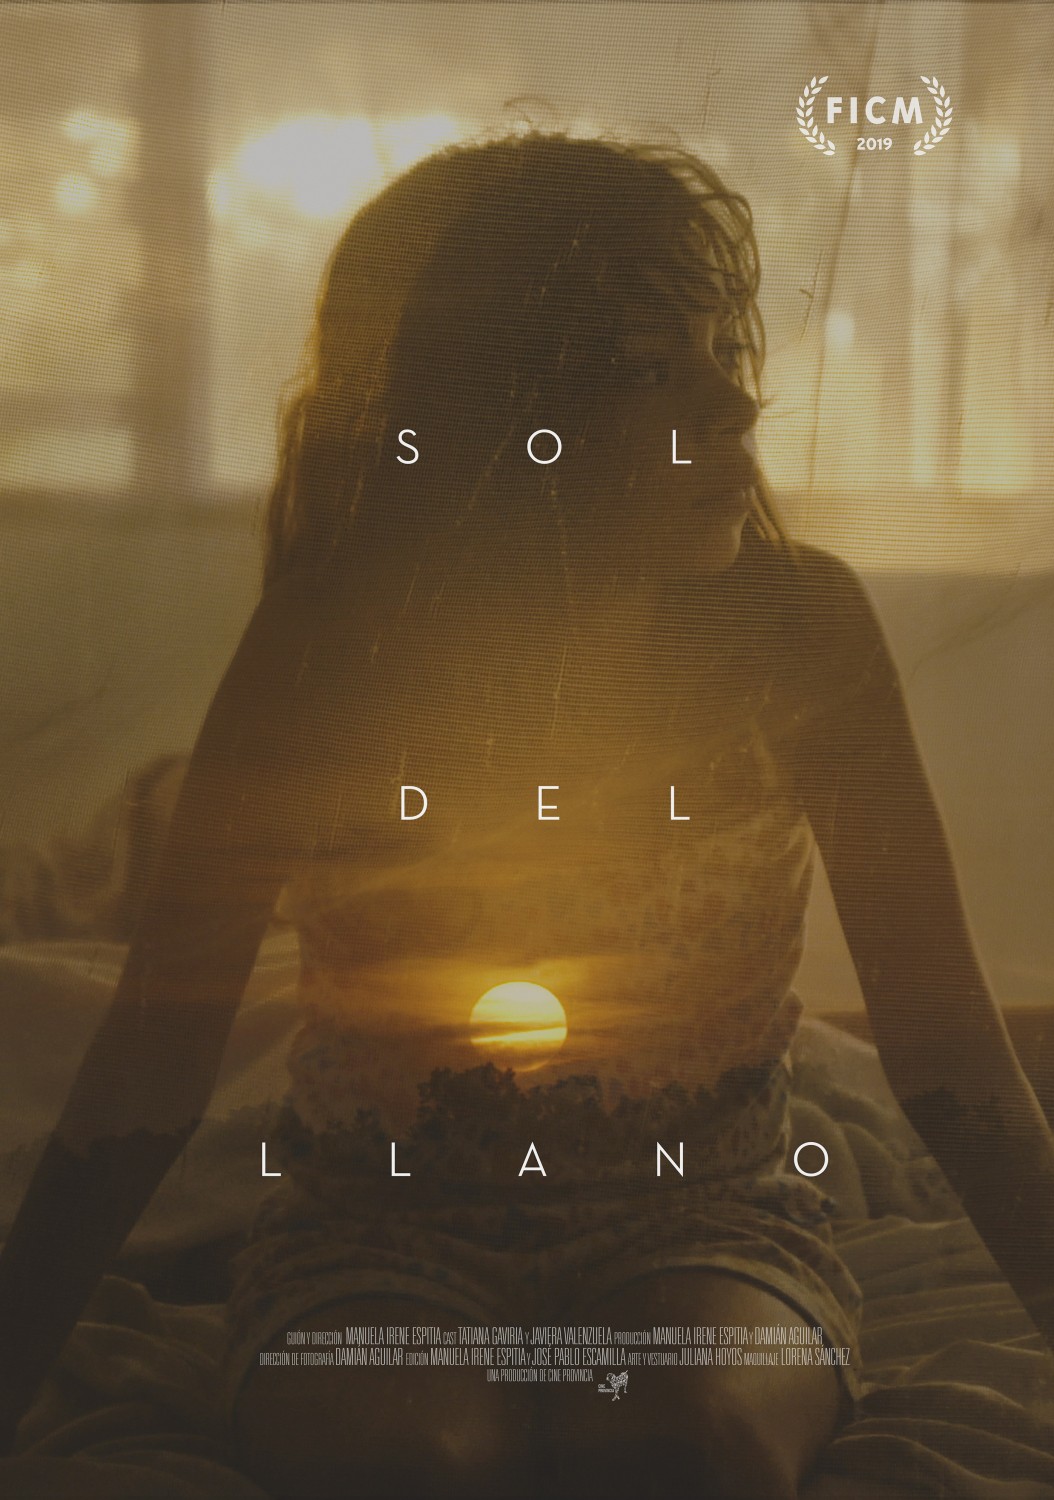 Extra Large Movie Poster Image for Sol del llano